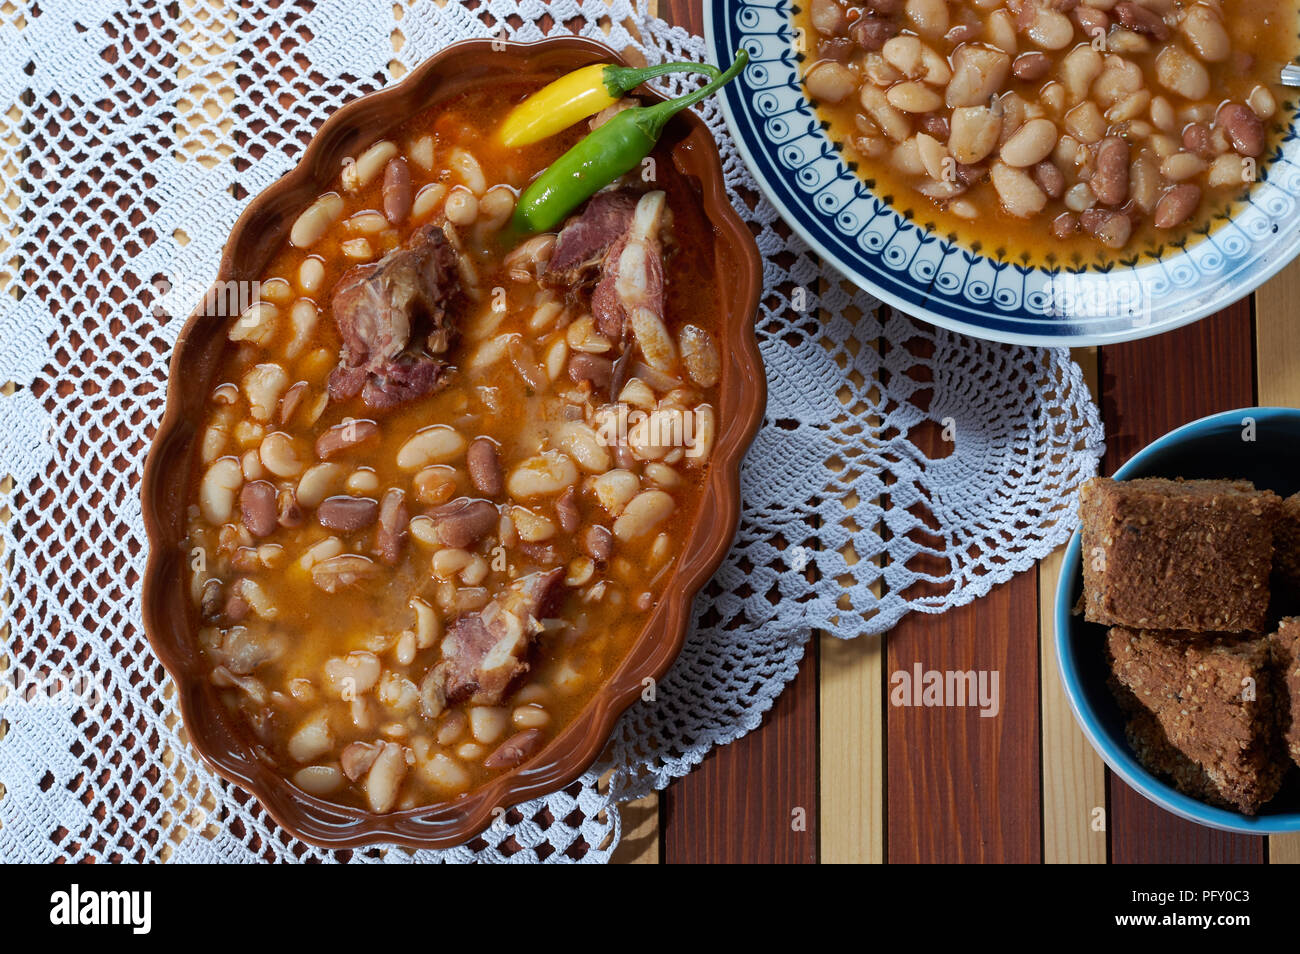 Beans with smoked pork on dinner plate with spelta bread Stock Photo